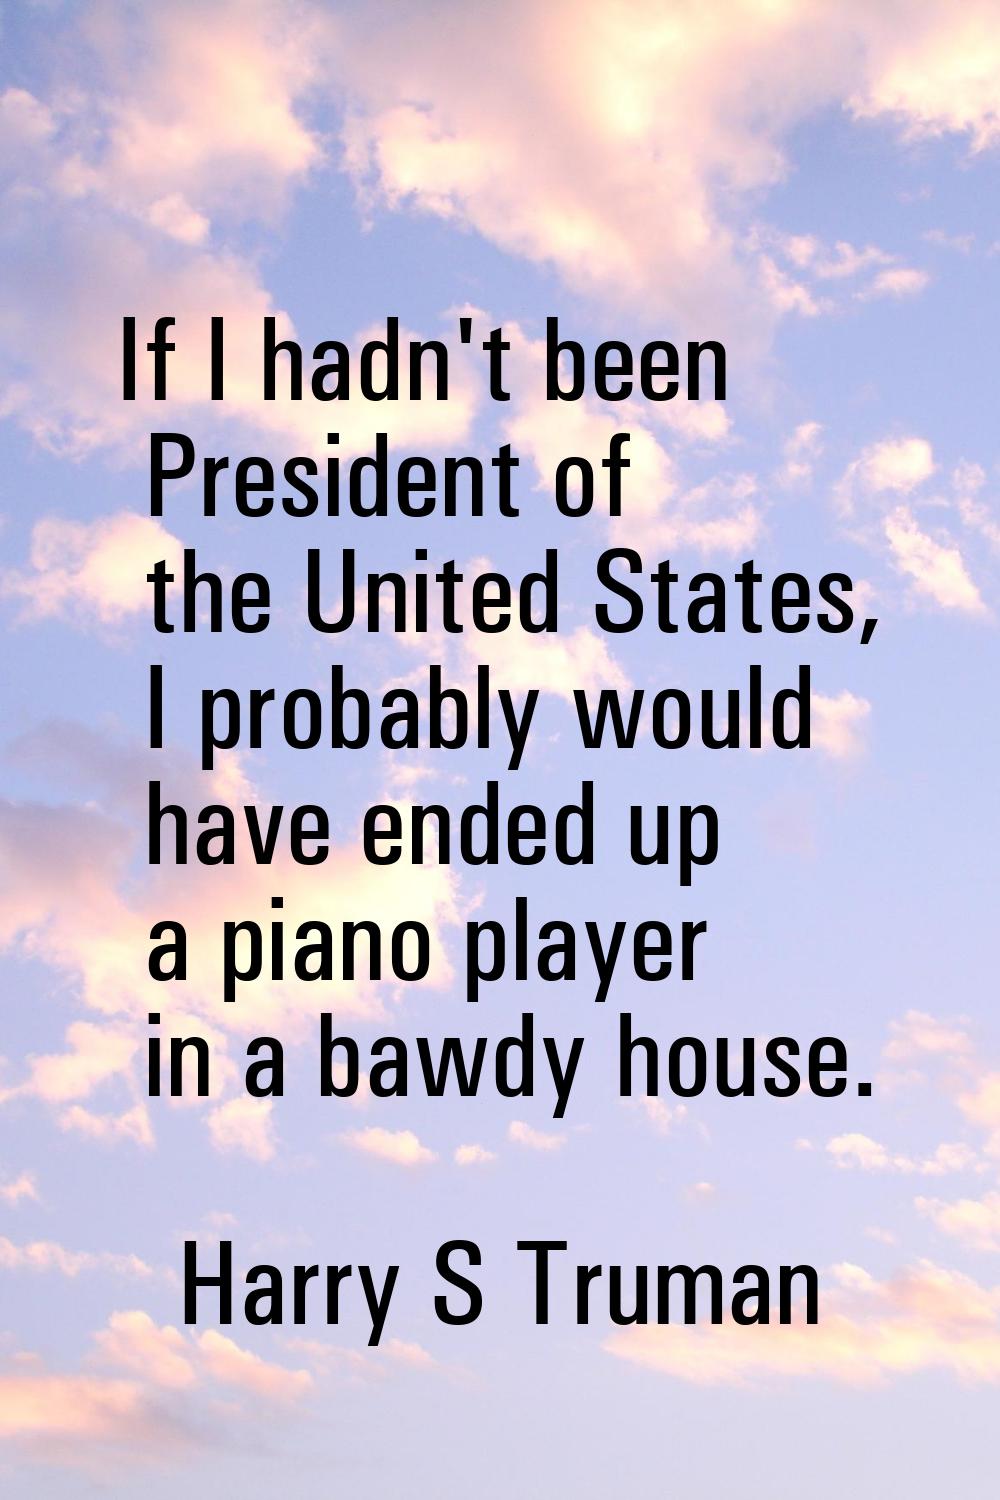 If I hadn't been President of the United States, I probably would have ended up a piano player in a